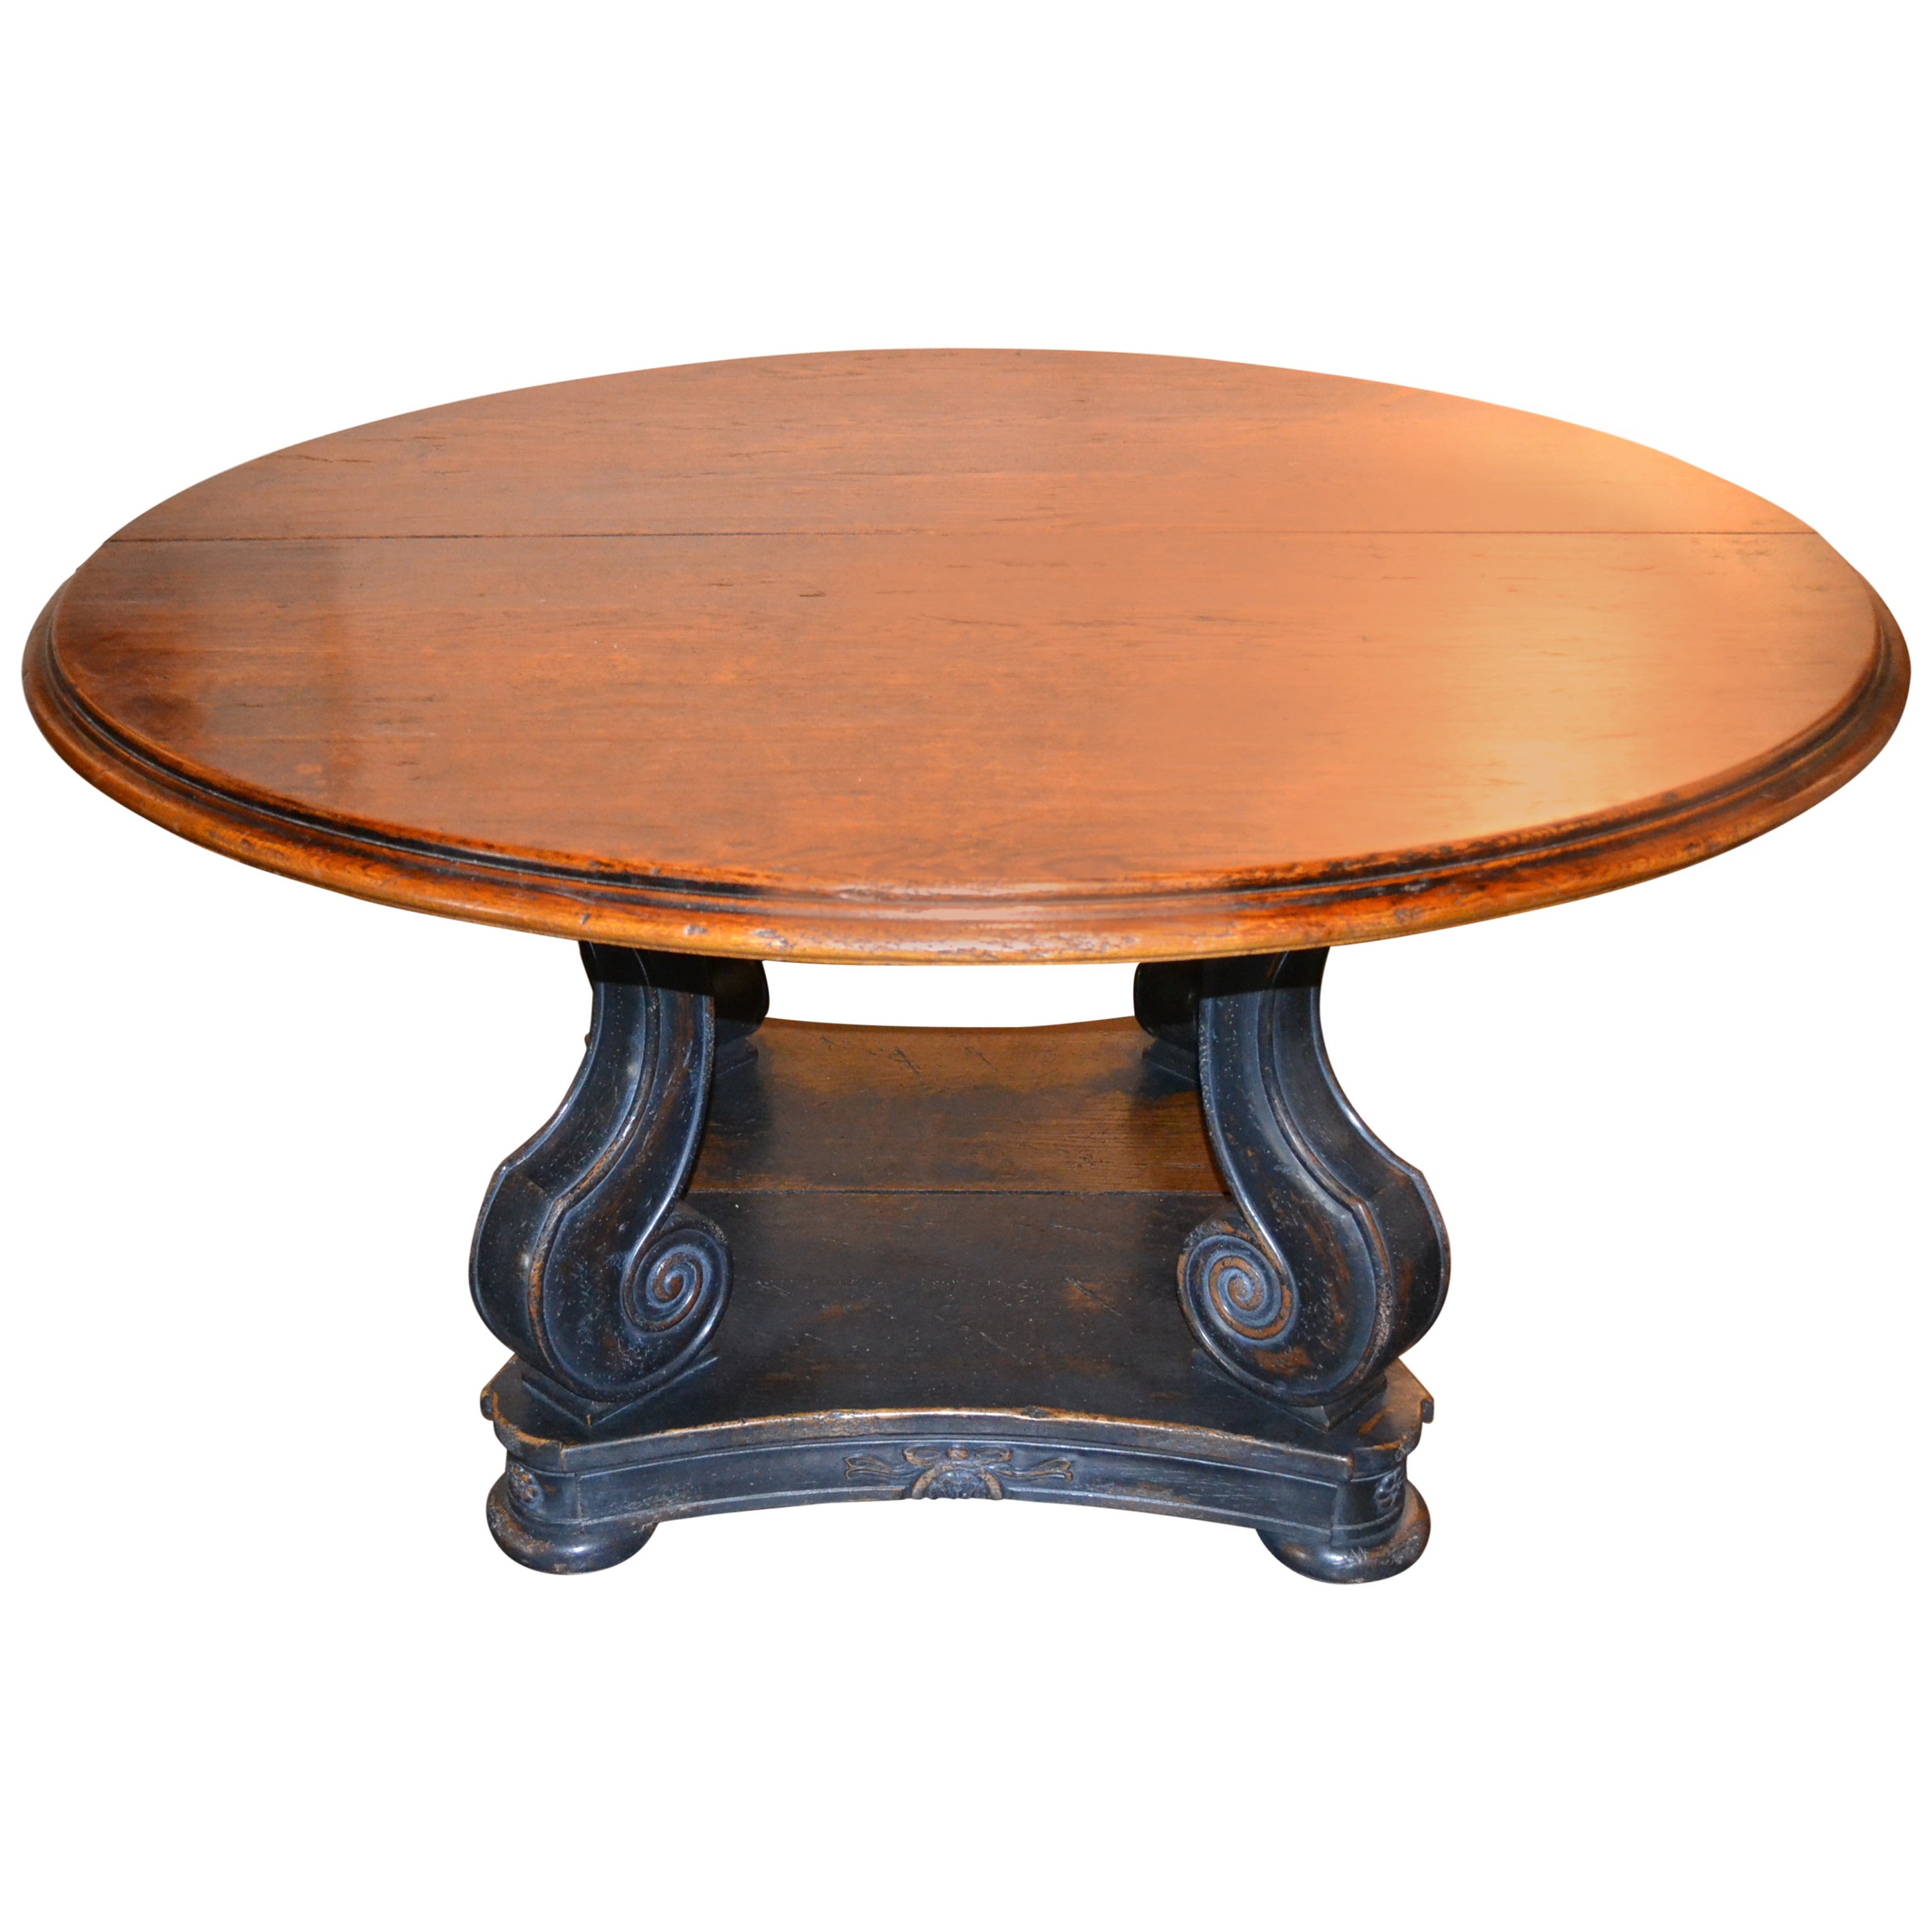 Italian Entry or Dining Table with Leaves